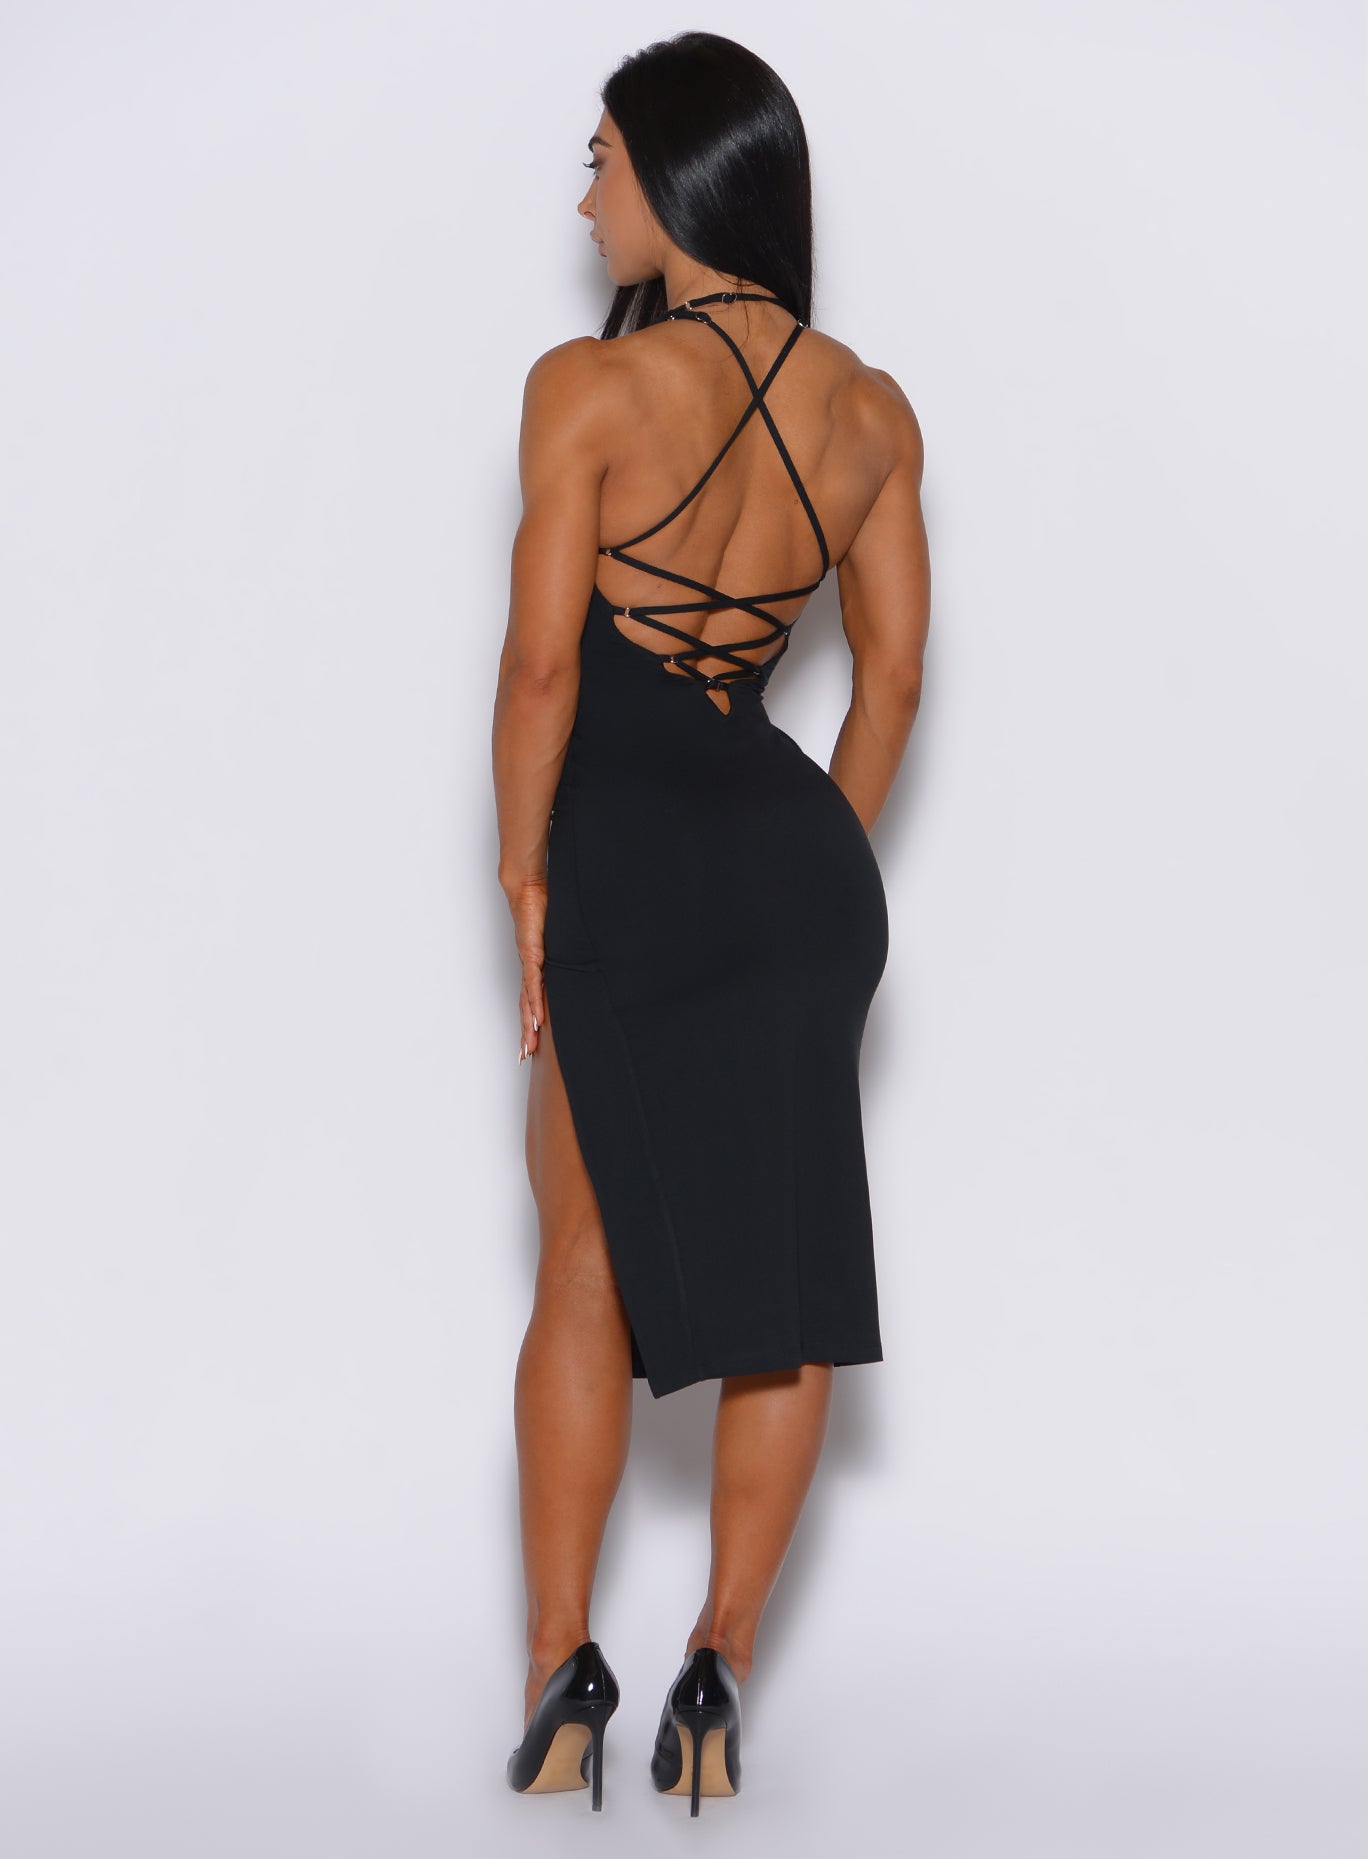 Back profile view of a model facing to her left wearing our black dress featuring a crisscross design at the back